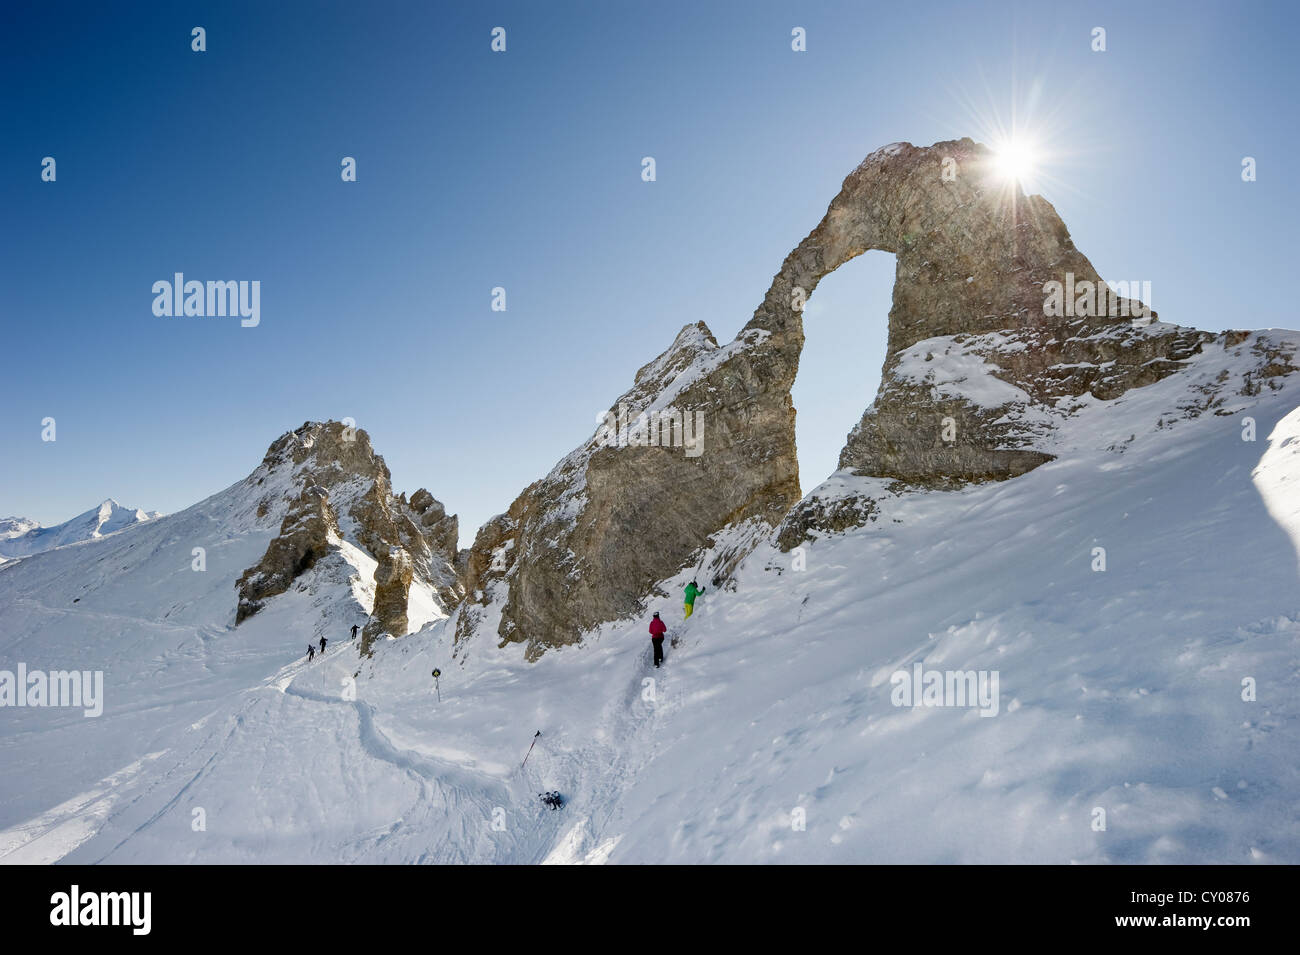 Snow-covered mountain landscape, Aiguille Percee, Tignes, Val d'Isere, Savoie, Alps, France, Europe Stock Photo